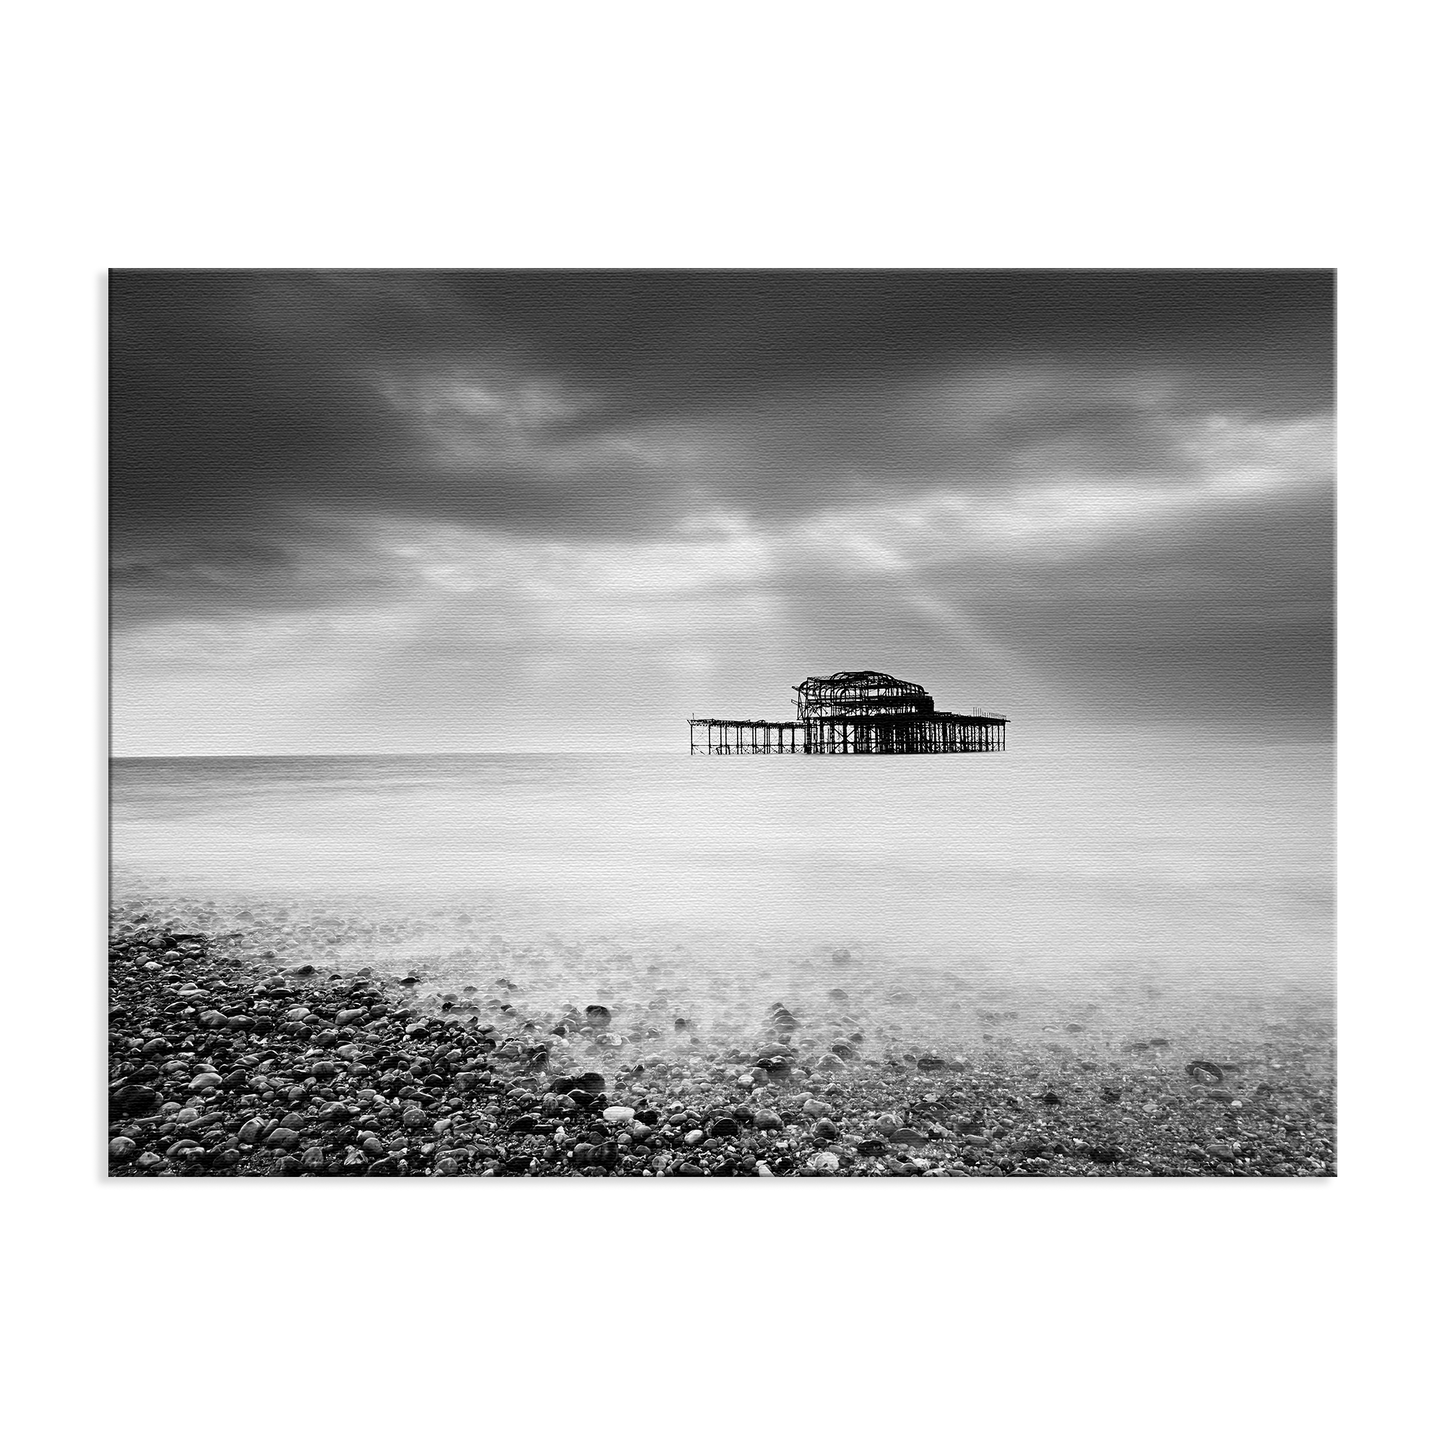 Above Couch Wall Decor: Abandoned West Pier Black and White - Coastal / Beach / Seascape / Nature / Landscape Photo Canvas Wall Art Print - Artwork - Wall Decor